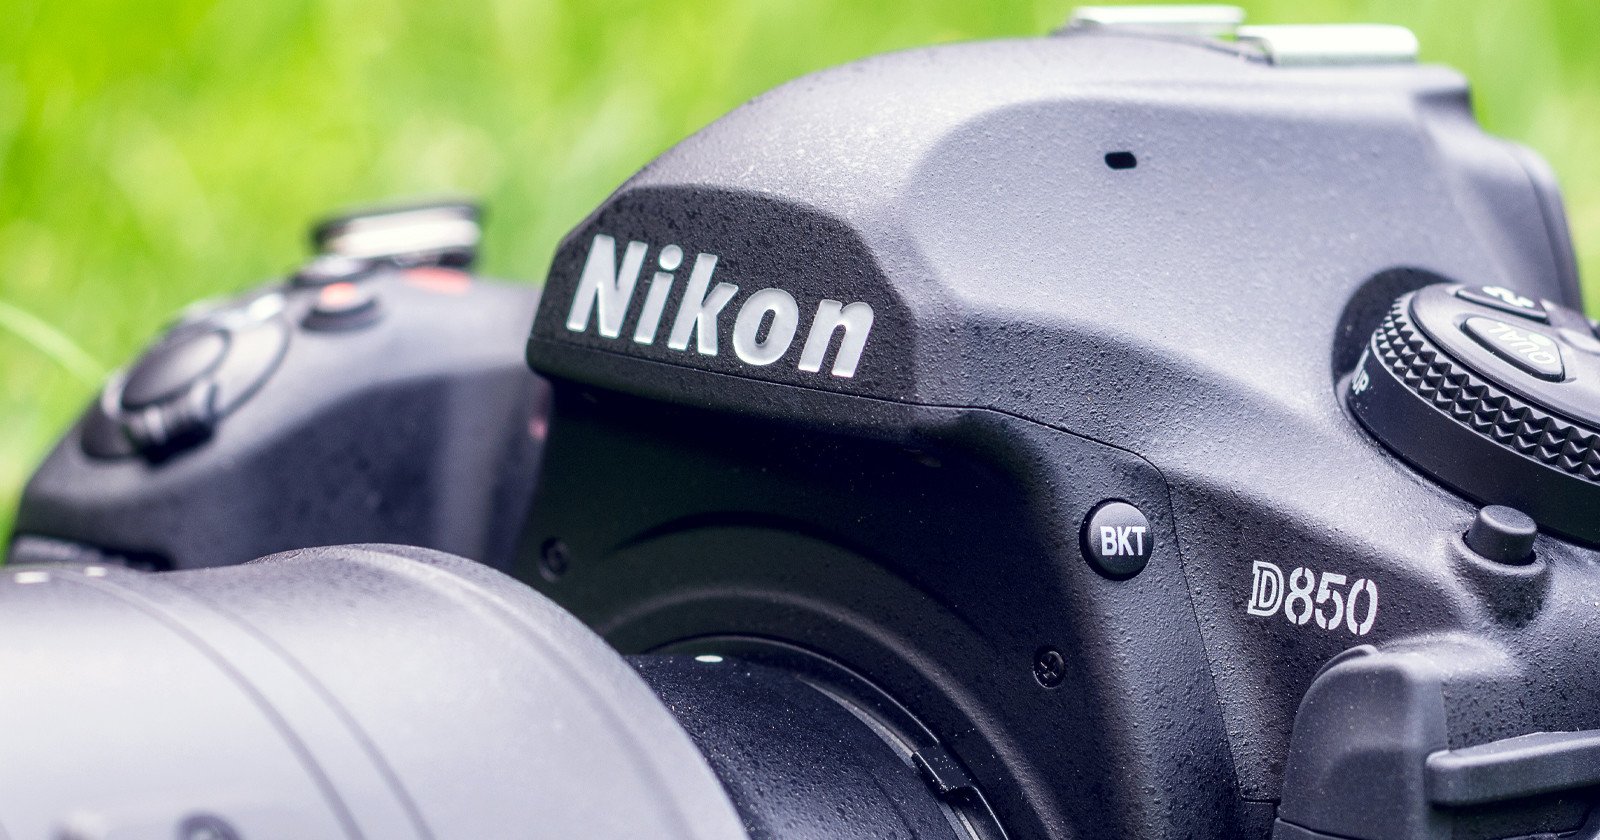 Of Course Nikon is Getting Out of DSLRs